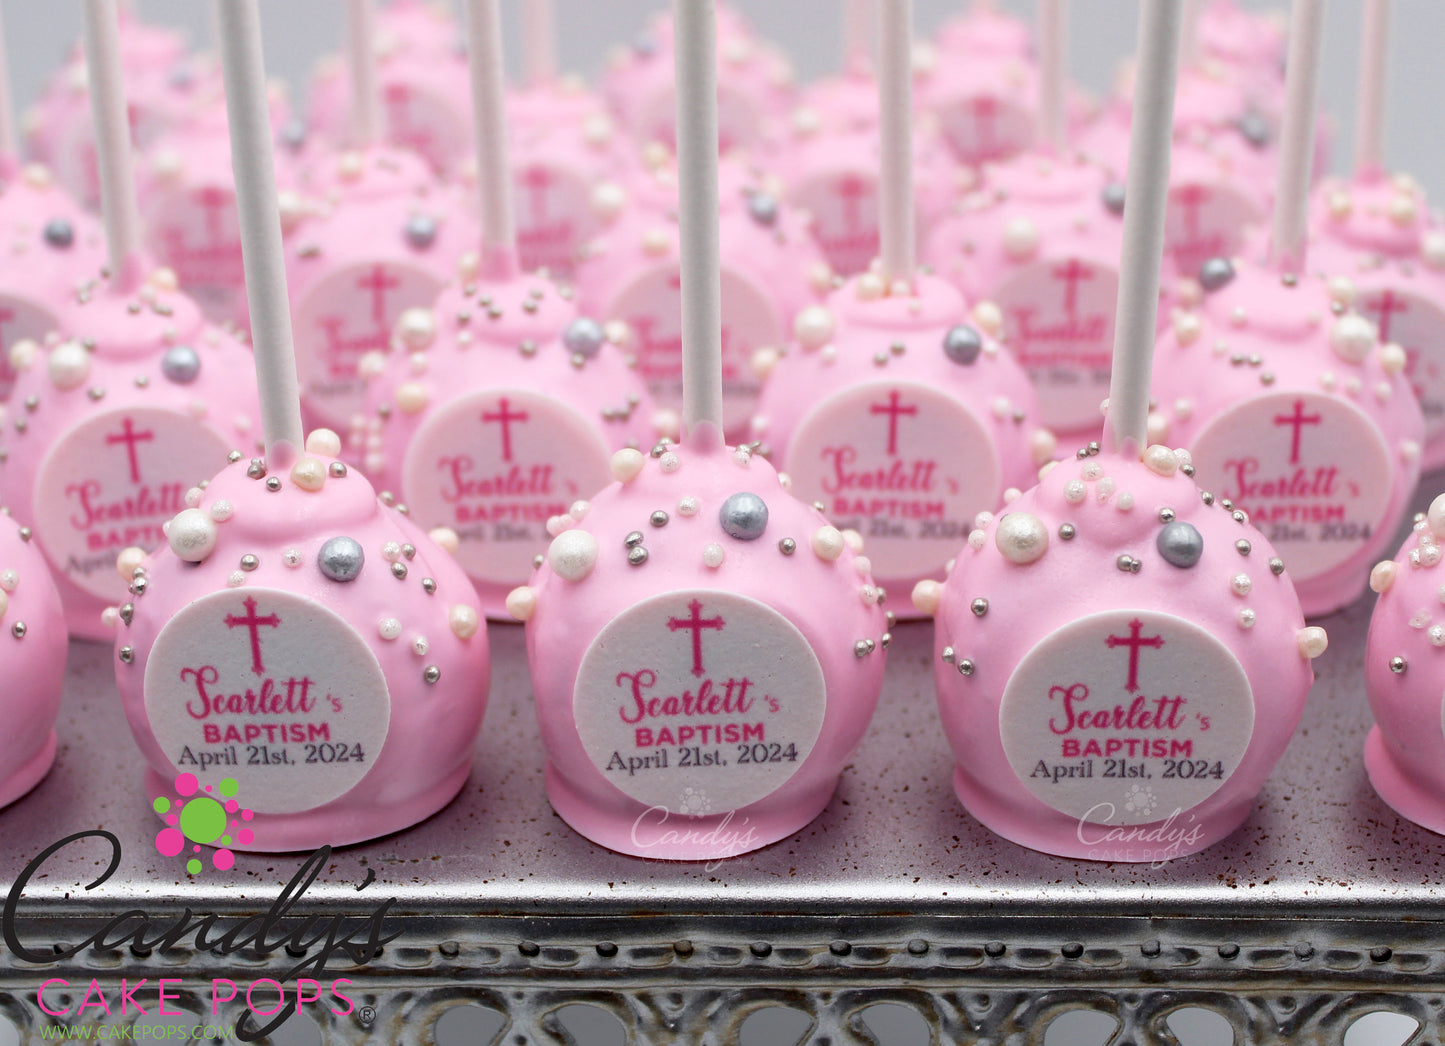 Baptism / Christening / Holy Communion Decal Cake Pops - Candy's Cake Pops